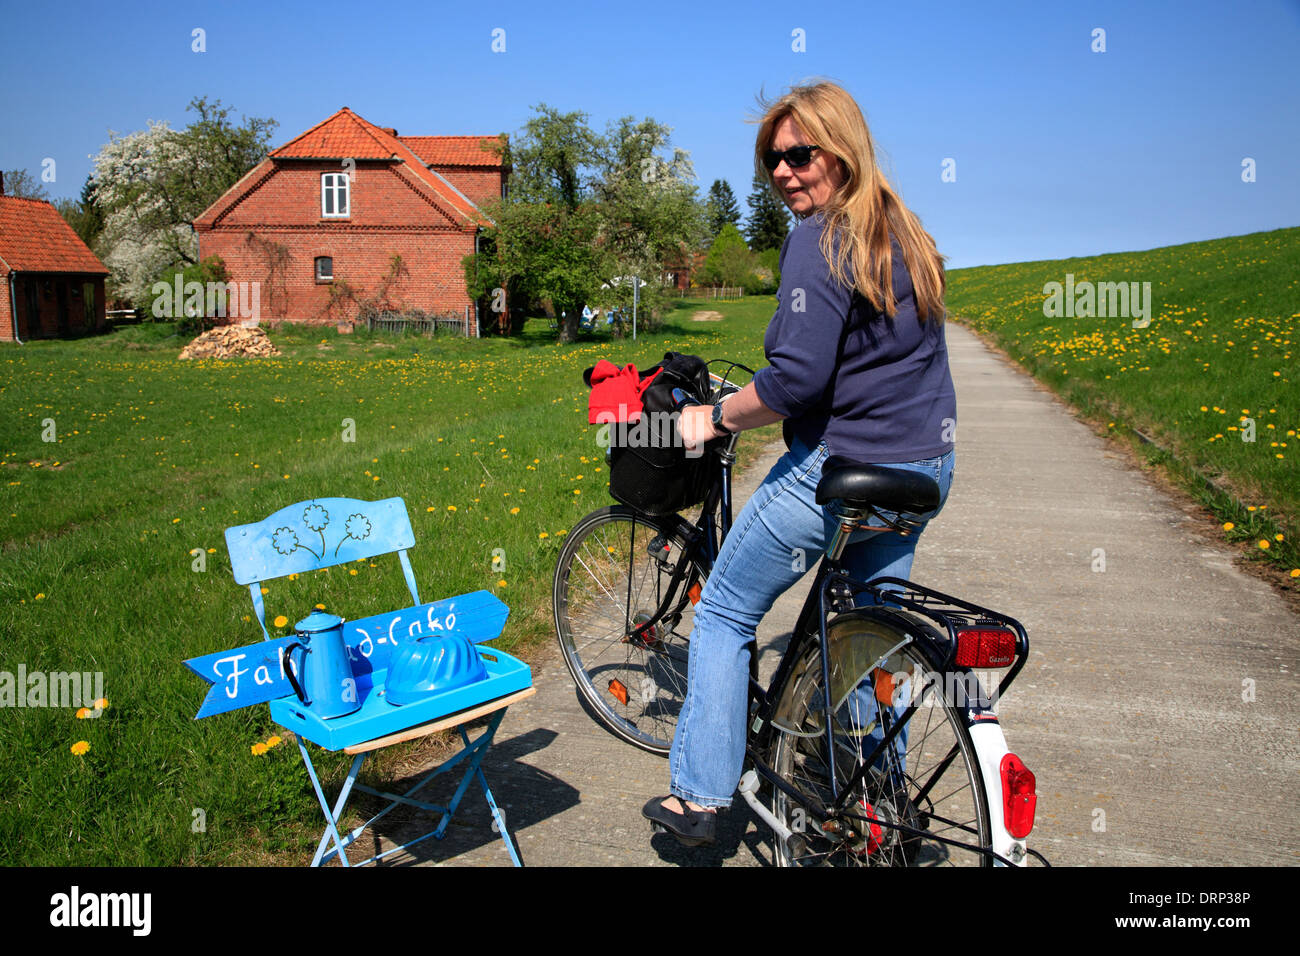 Cyclist at Sign for a Cycle Cafe at Wilkenstorf, Elbe Cycle Route, Amt Neuhaus, Lower Saxony, Germany, Europe Stock Photo